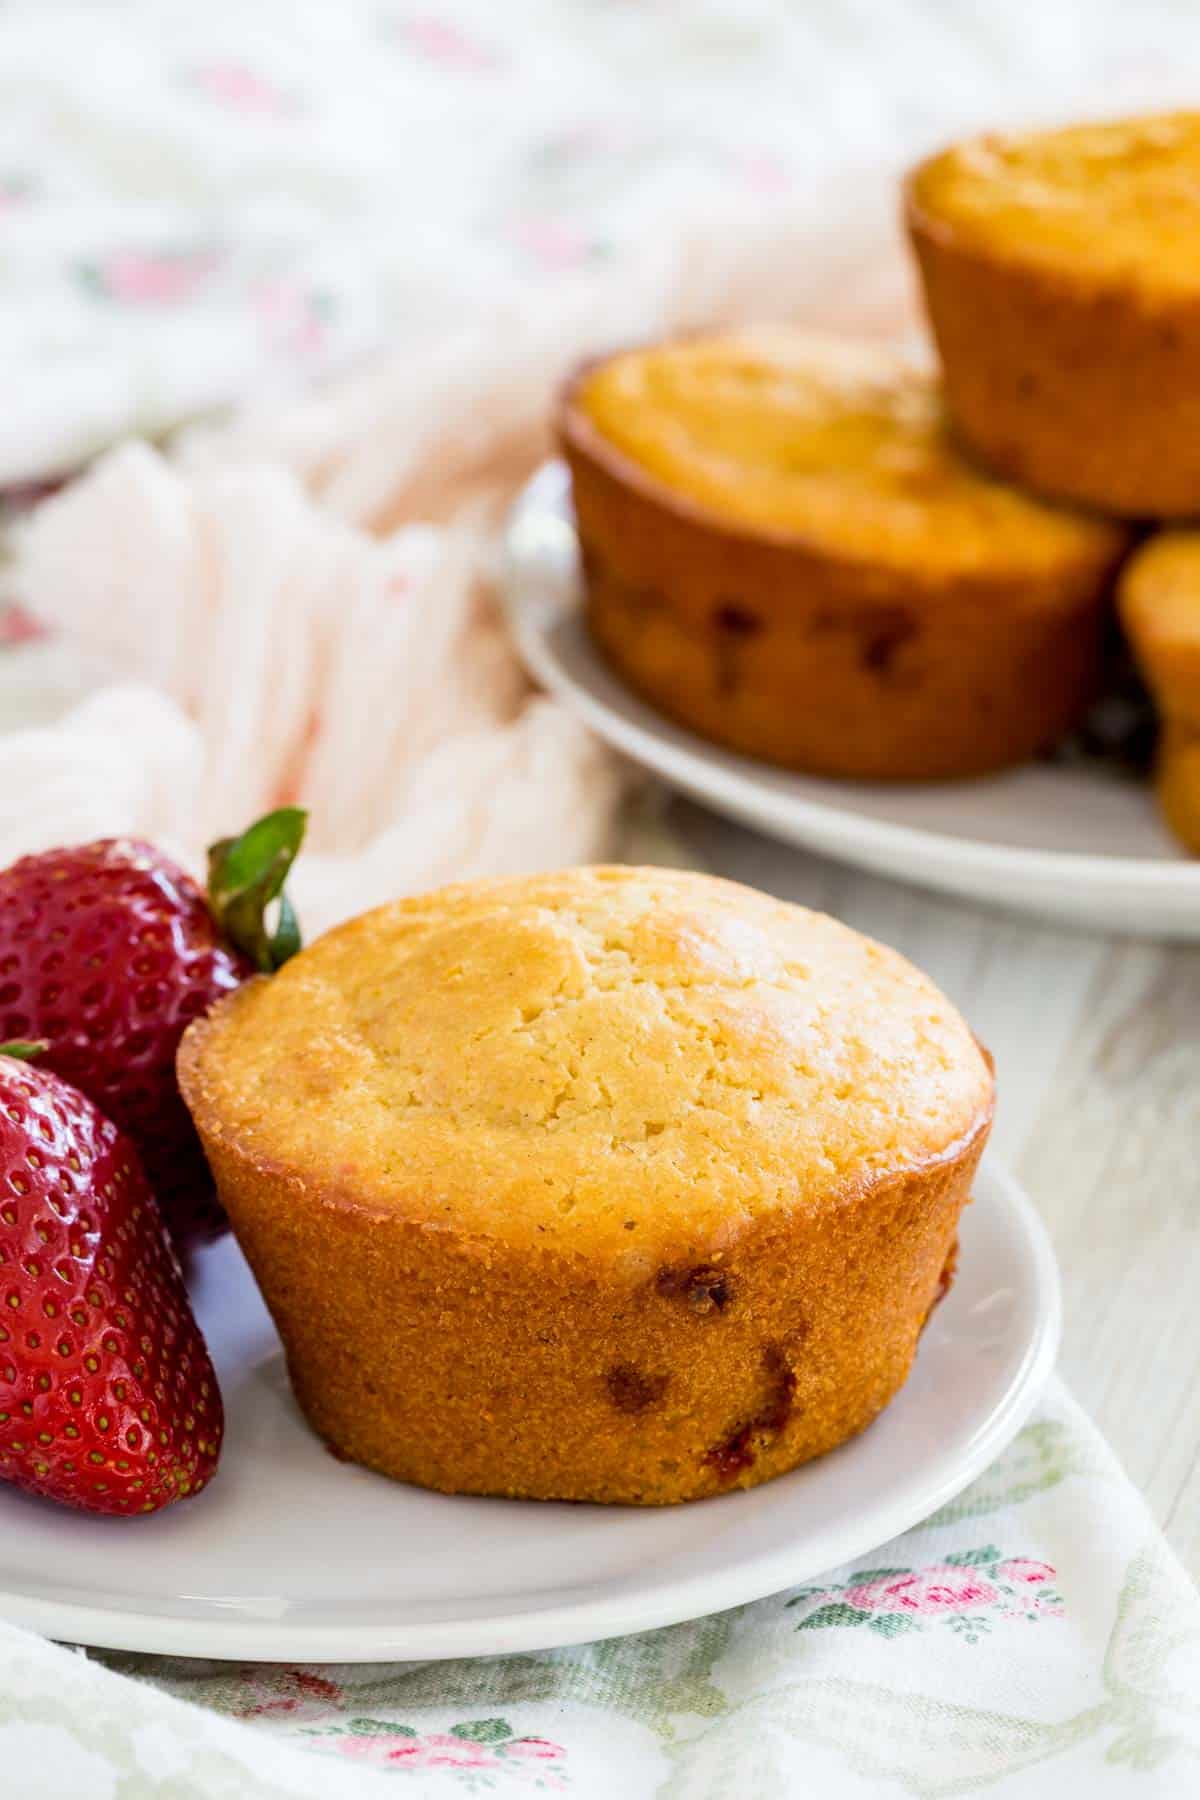 A strawberry muffin on a white plate next to a strawberry, with another plate of muffins in the background.